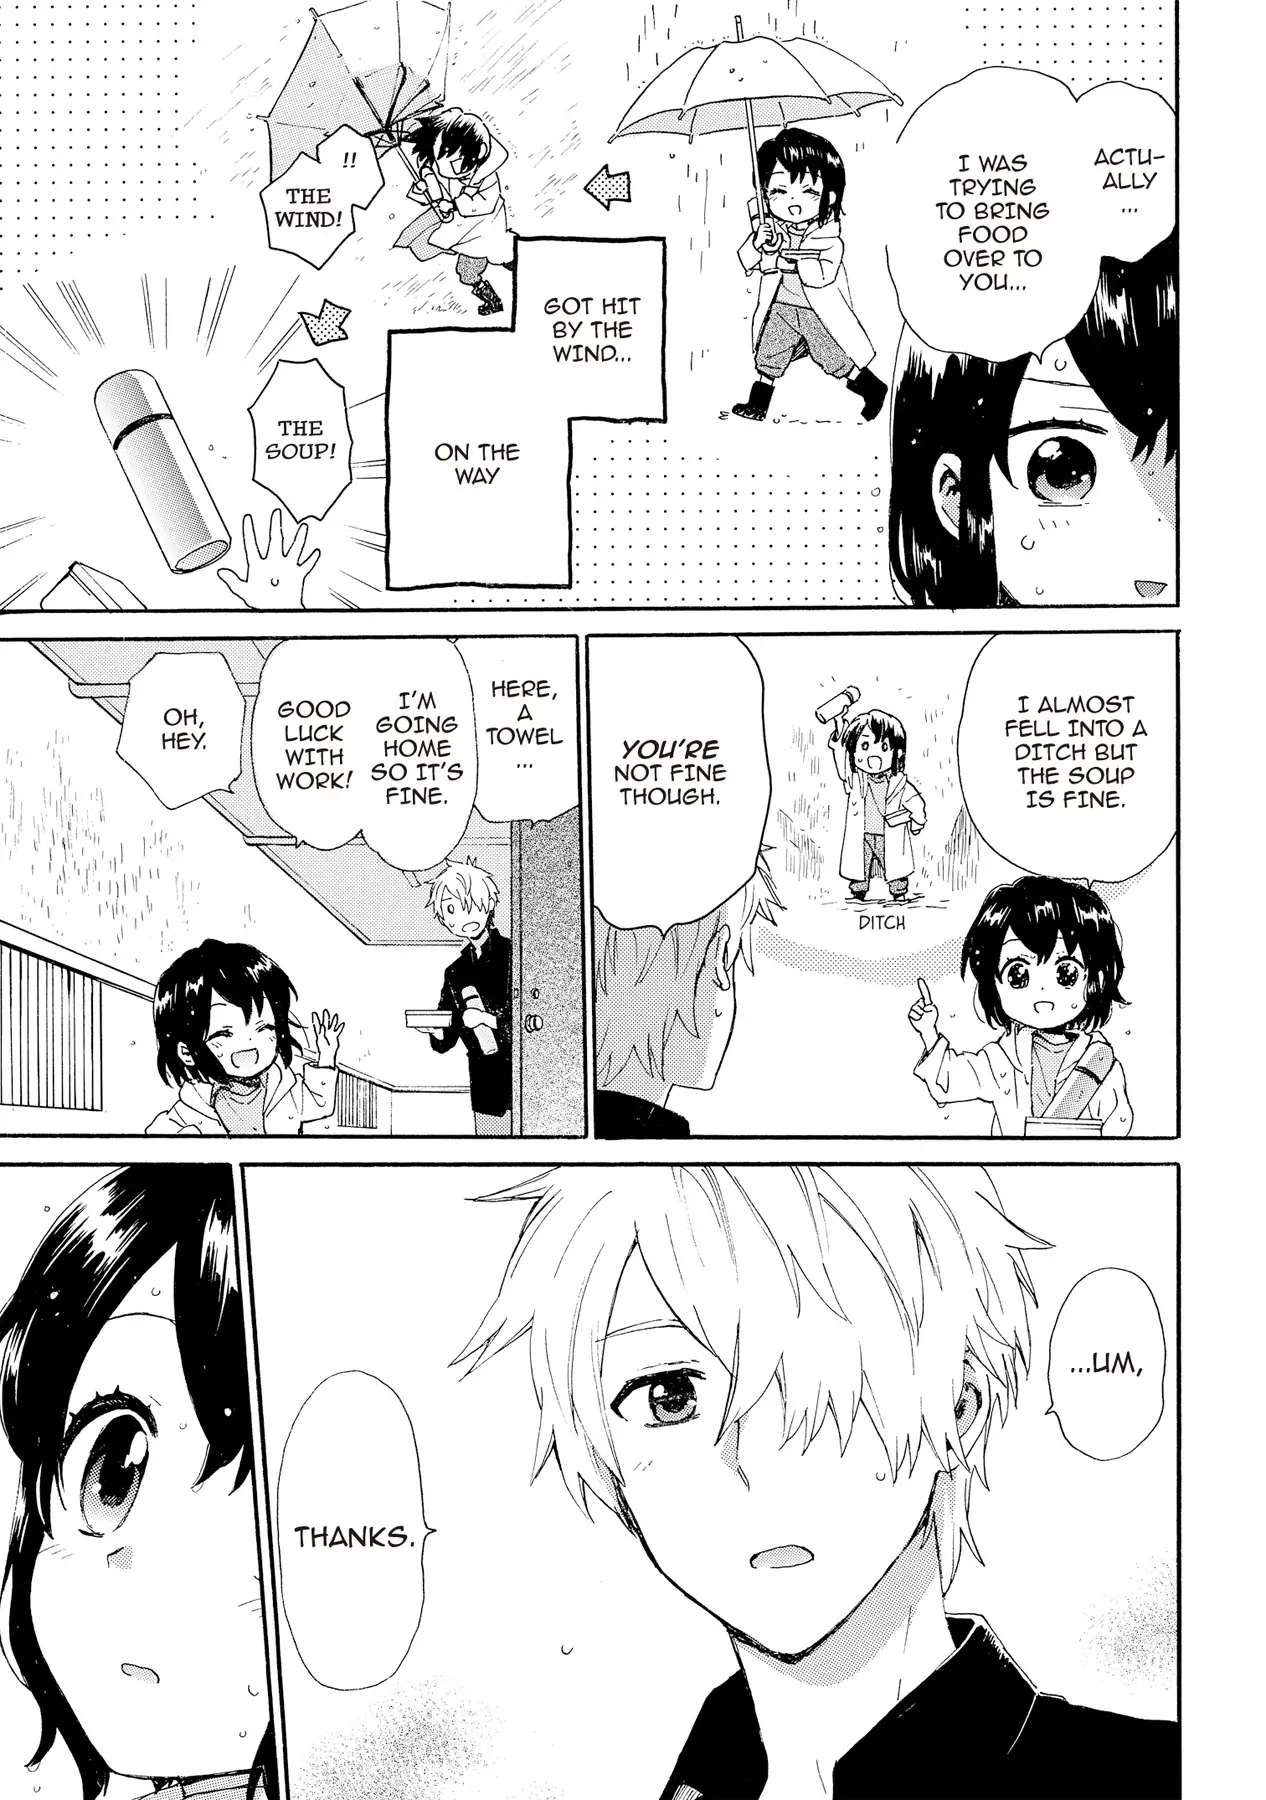 The Cute Little Granny Girl Hinata-chan - chapter 90 - #4